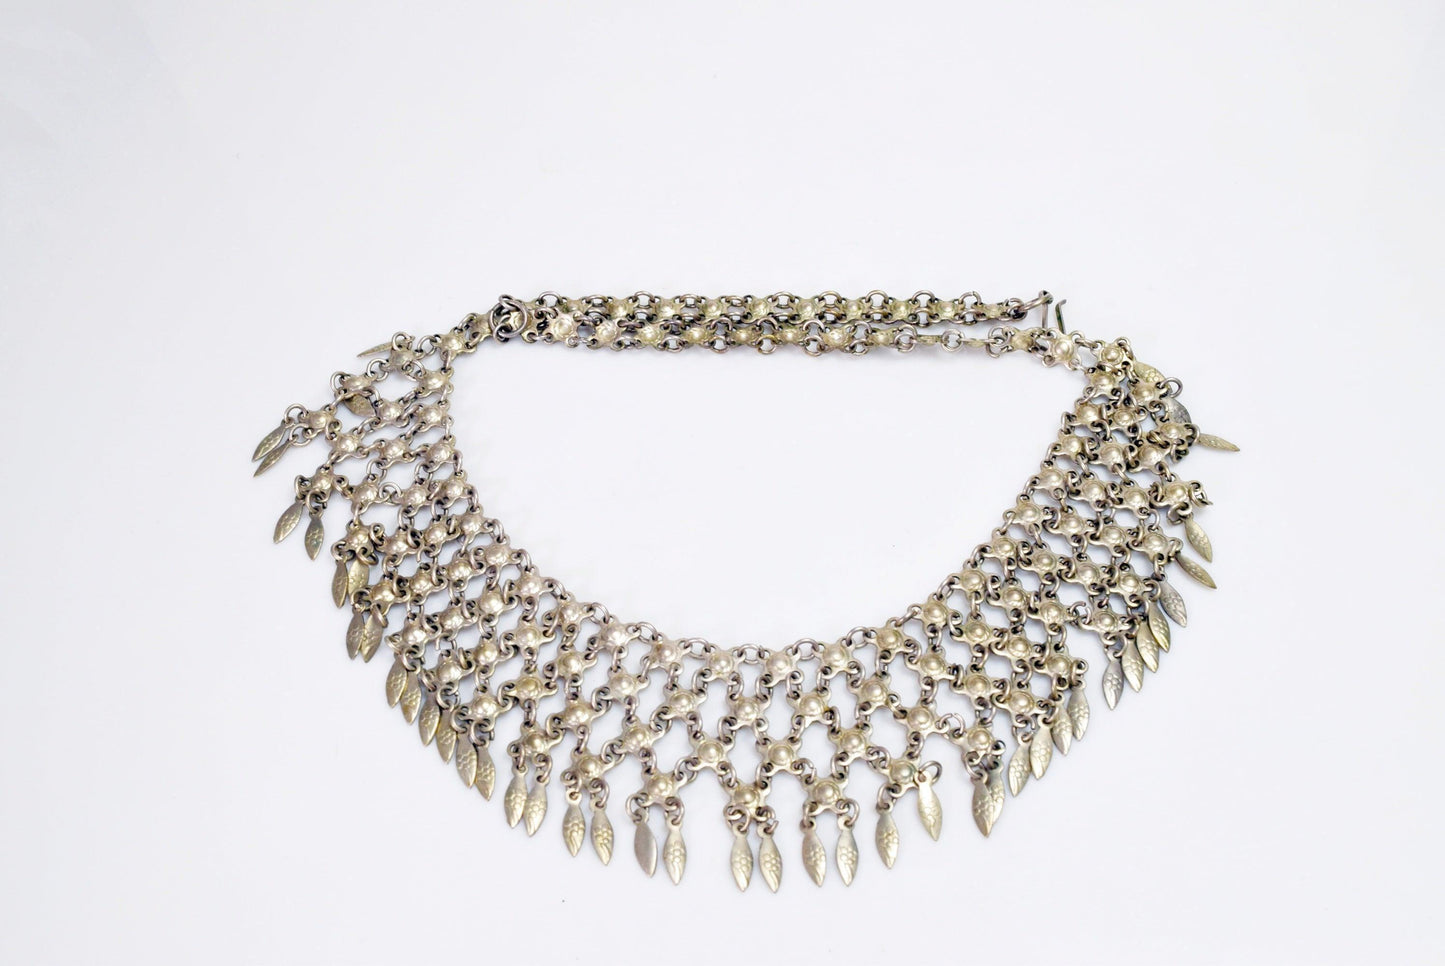 Middle East bib necklace